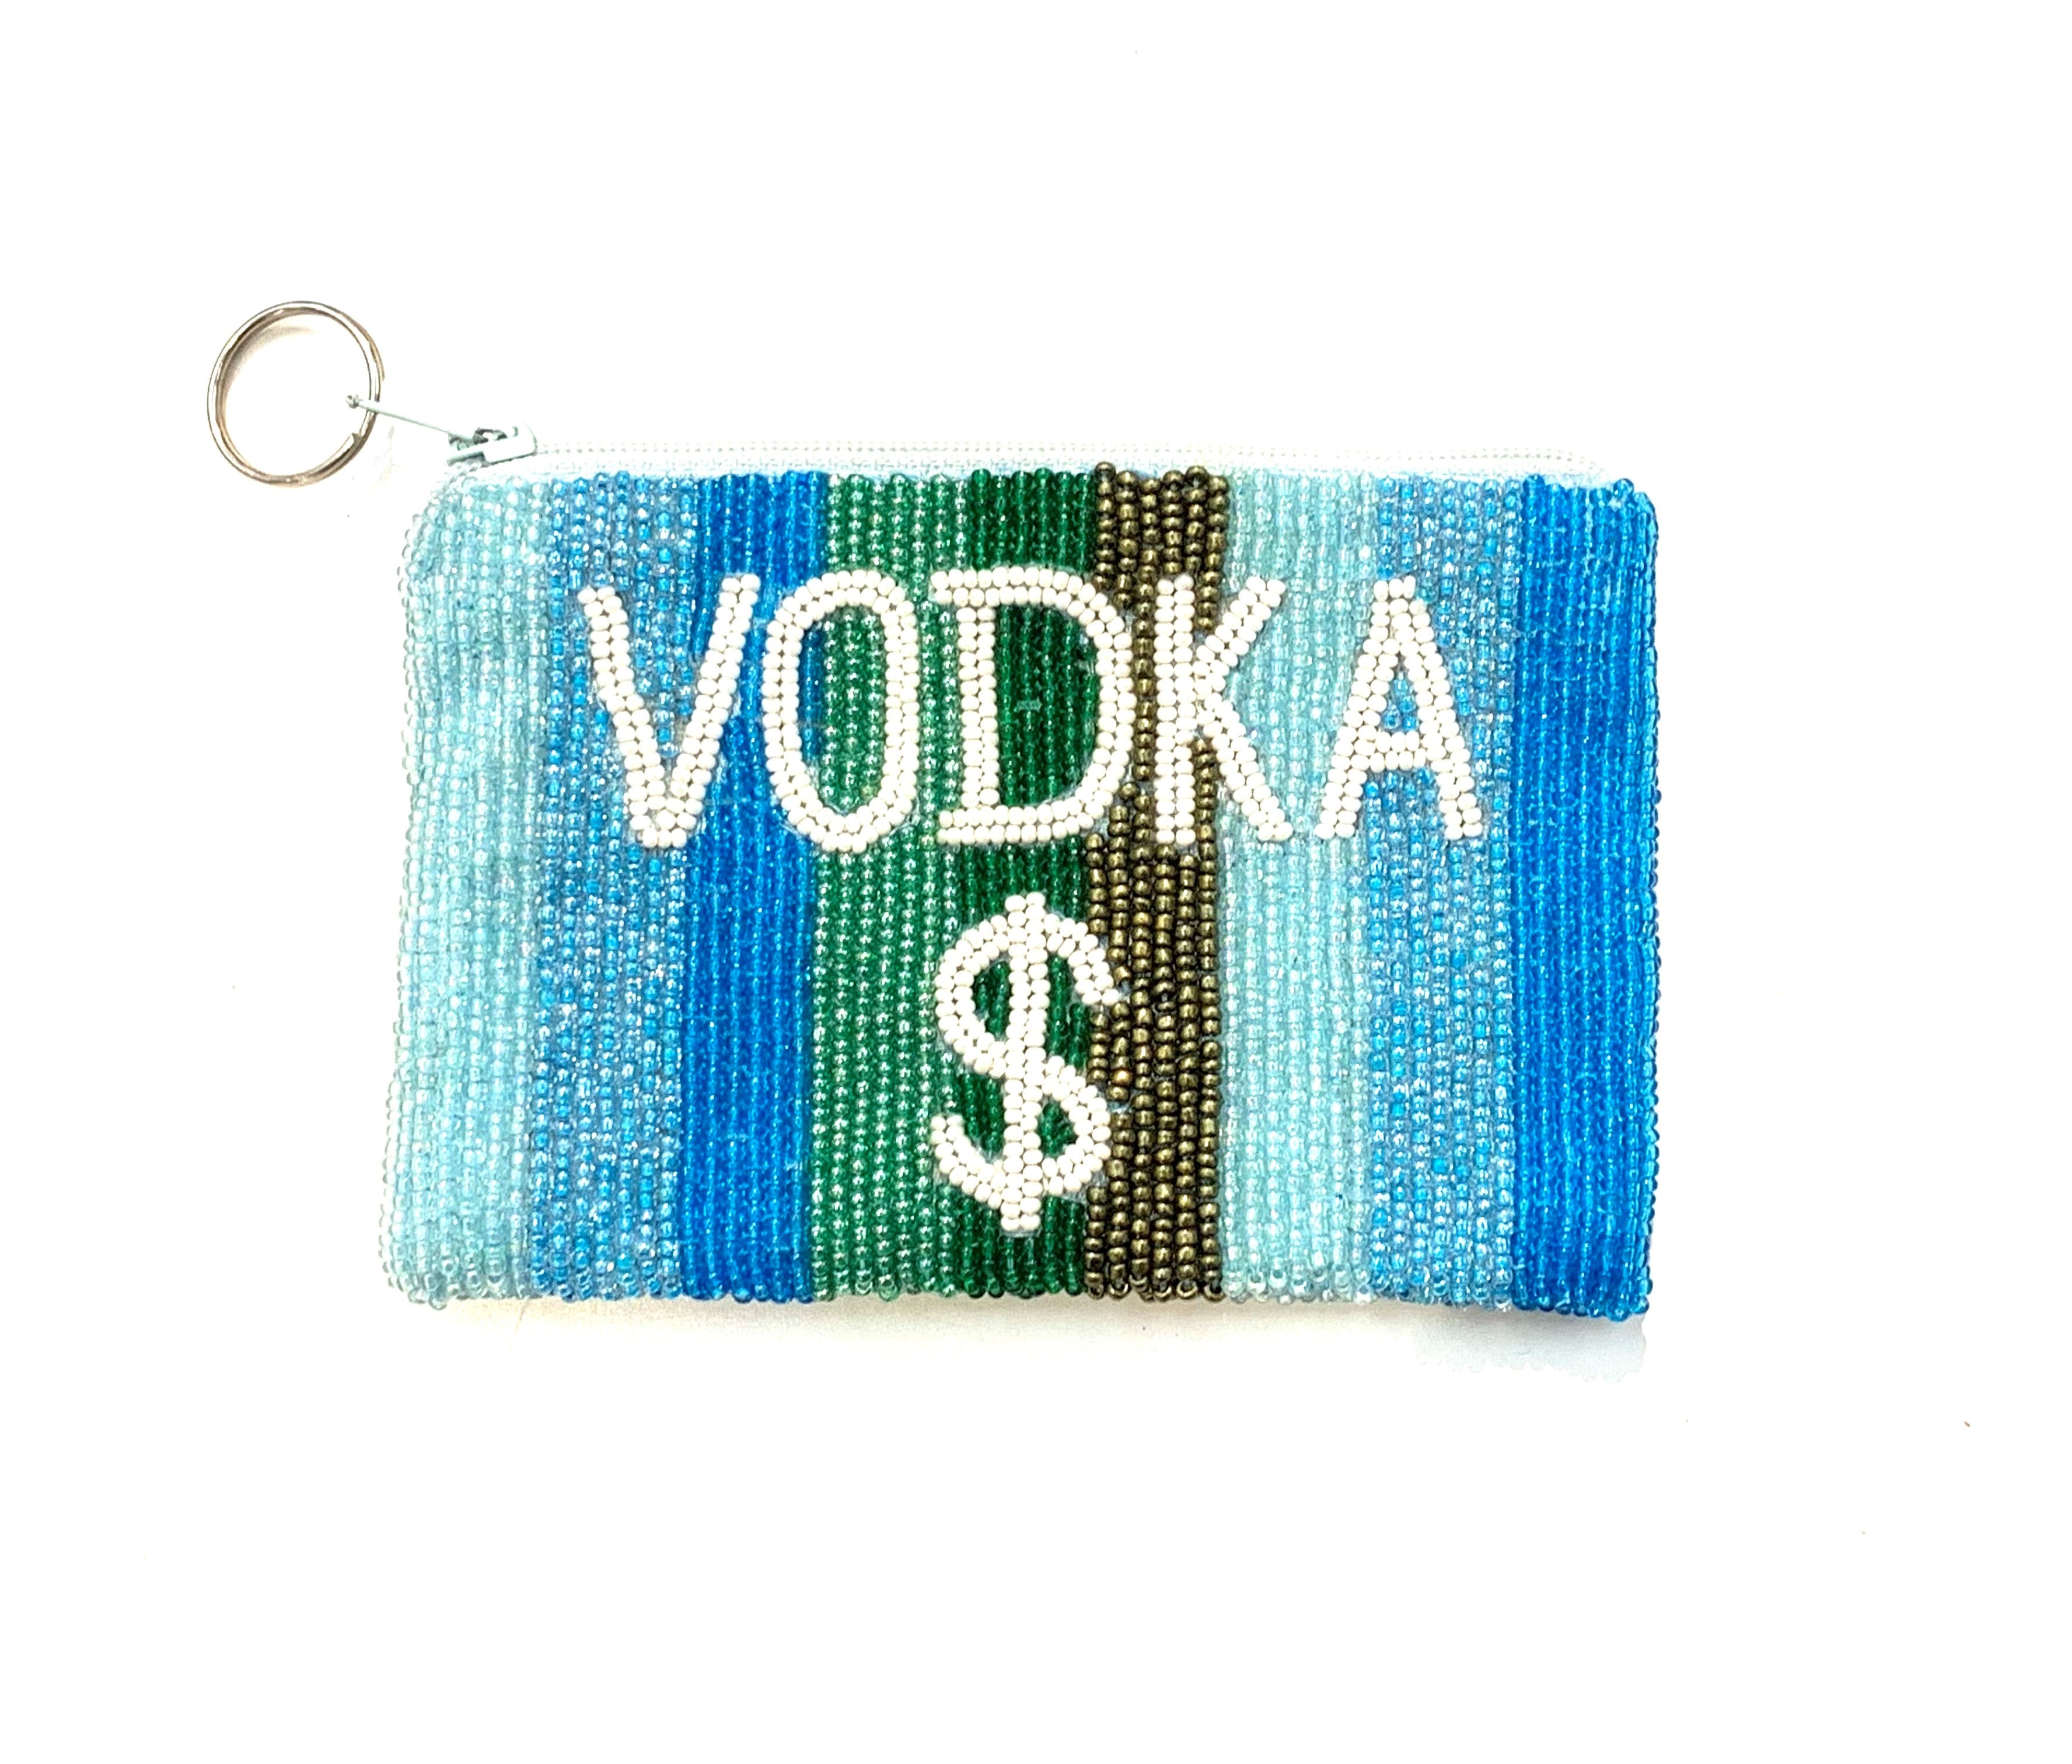 The Beaded Vodka Money Pouch in Blue Ombre